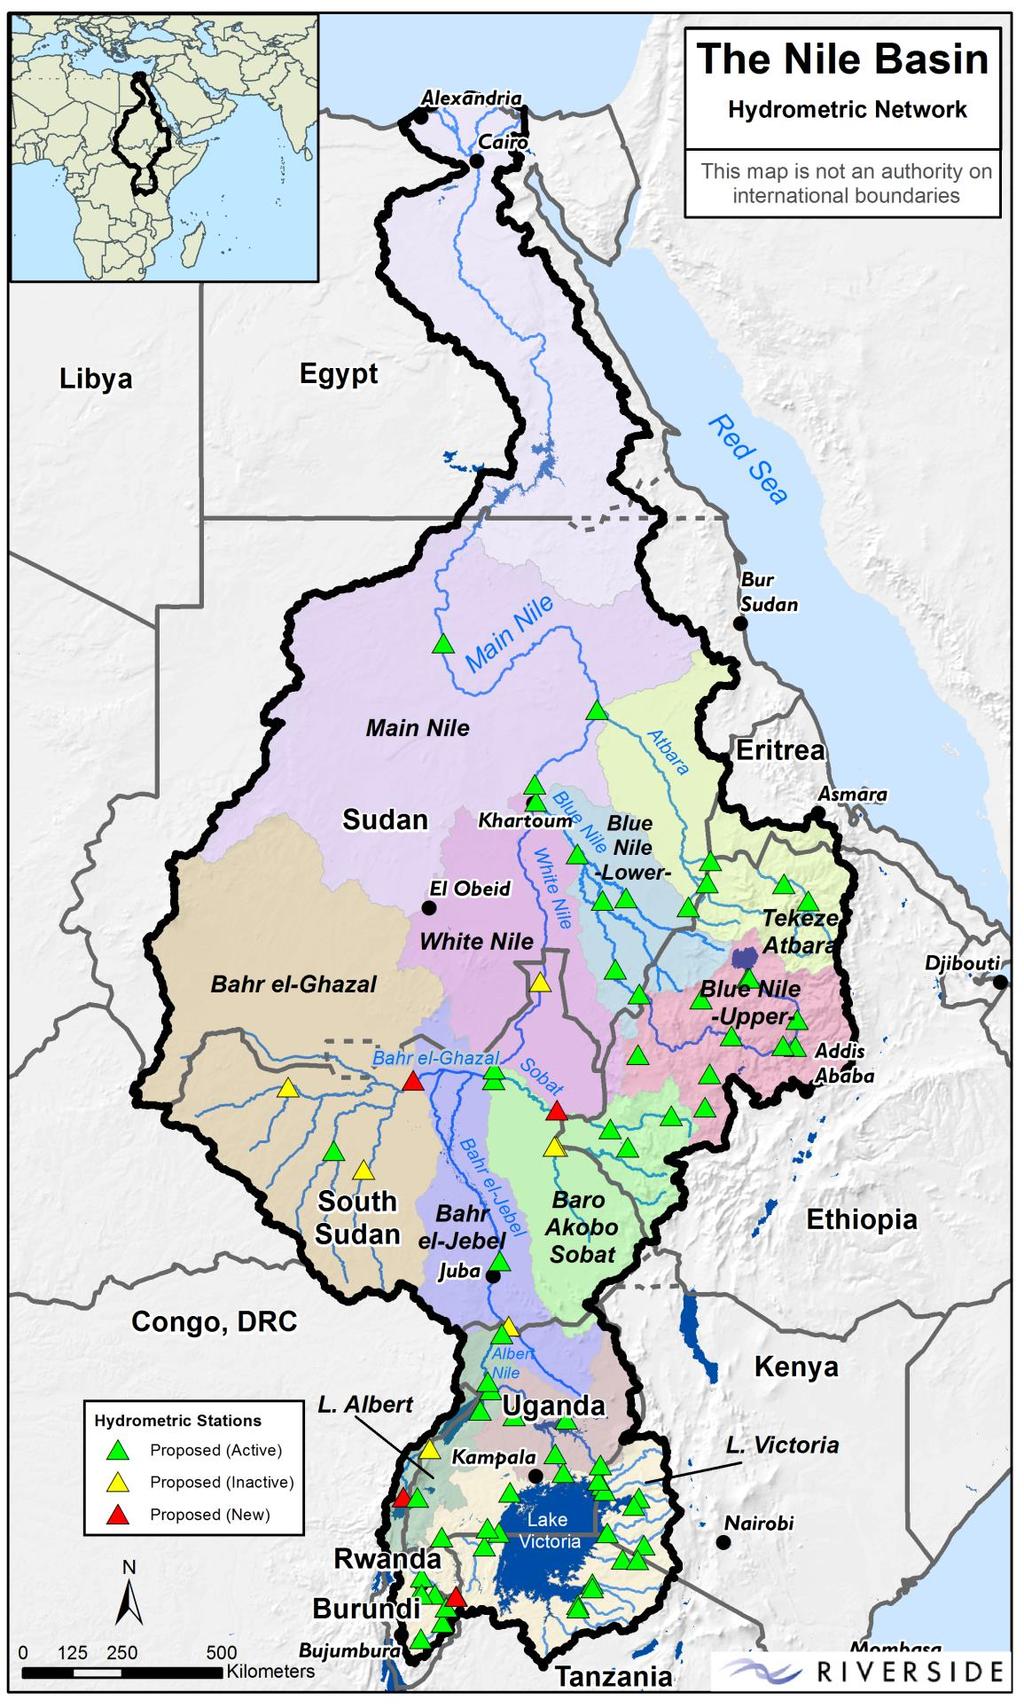 Design Overview - Hydrometric Proposed Hydrometric Network Country Active Inactive New WQ Sed Total Burundi 2 0 0 1 2 2 DRC 0 0 1 1 0 1 Ethiopia 16 0 0 4 15 16 Kenya 6